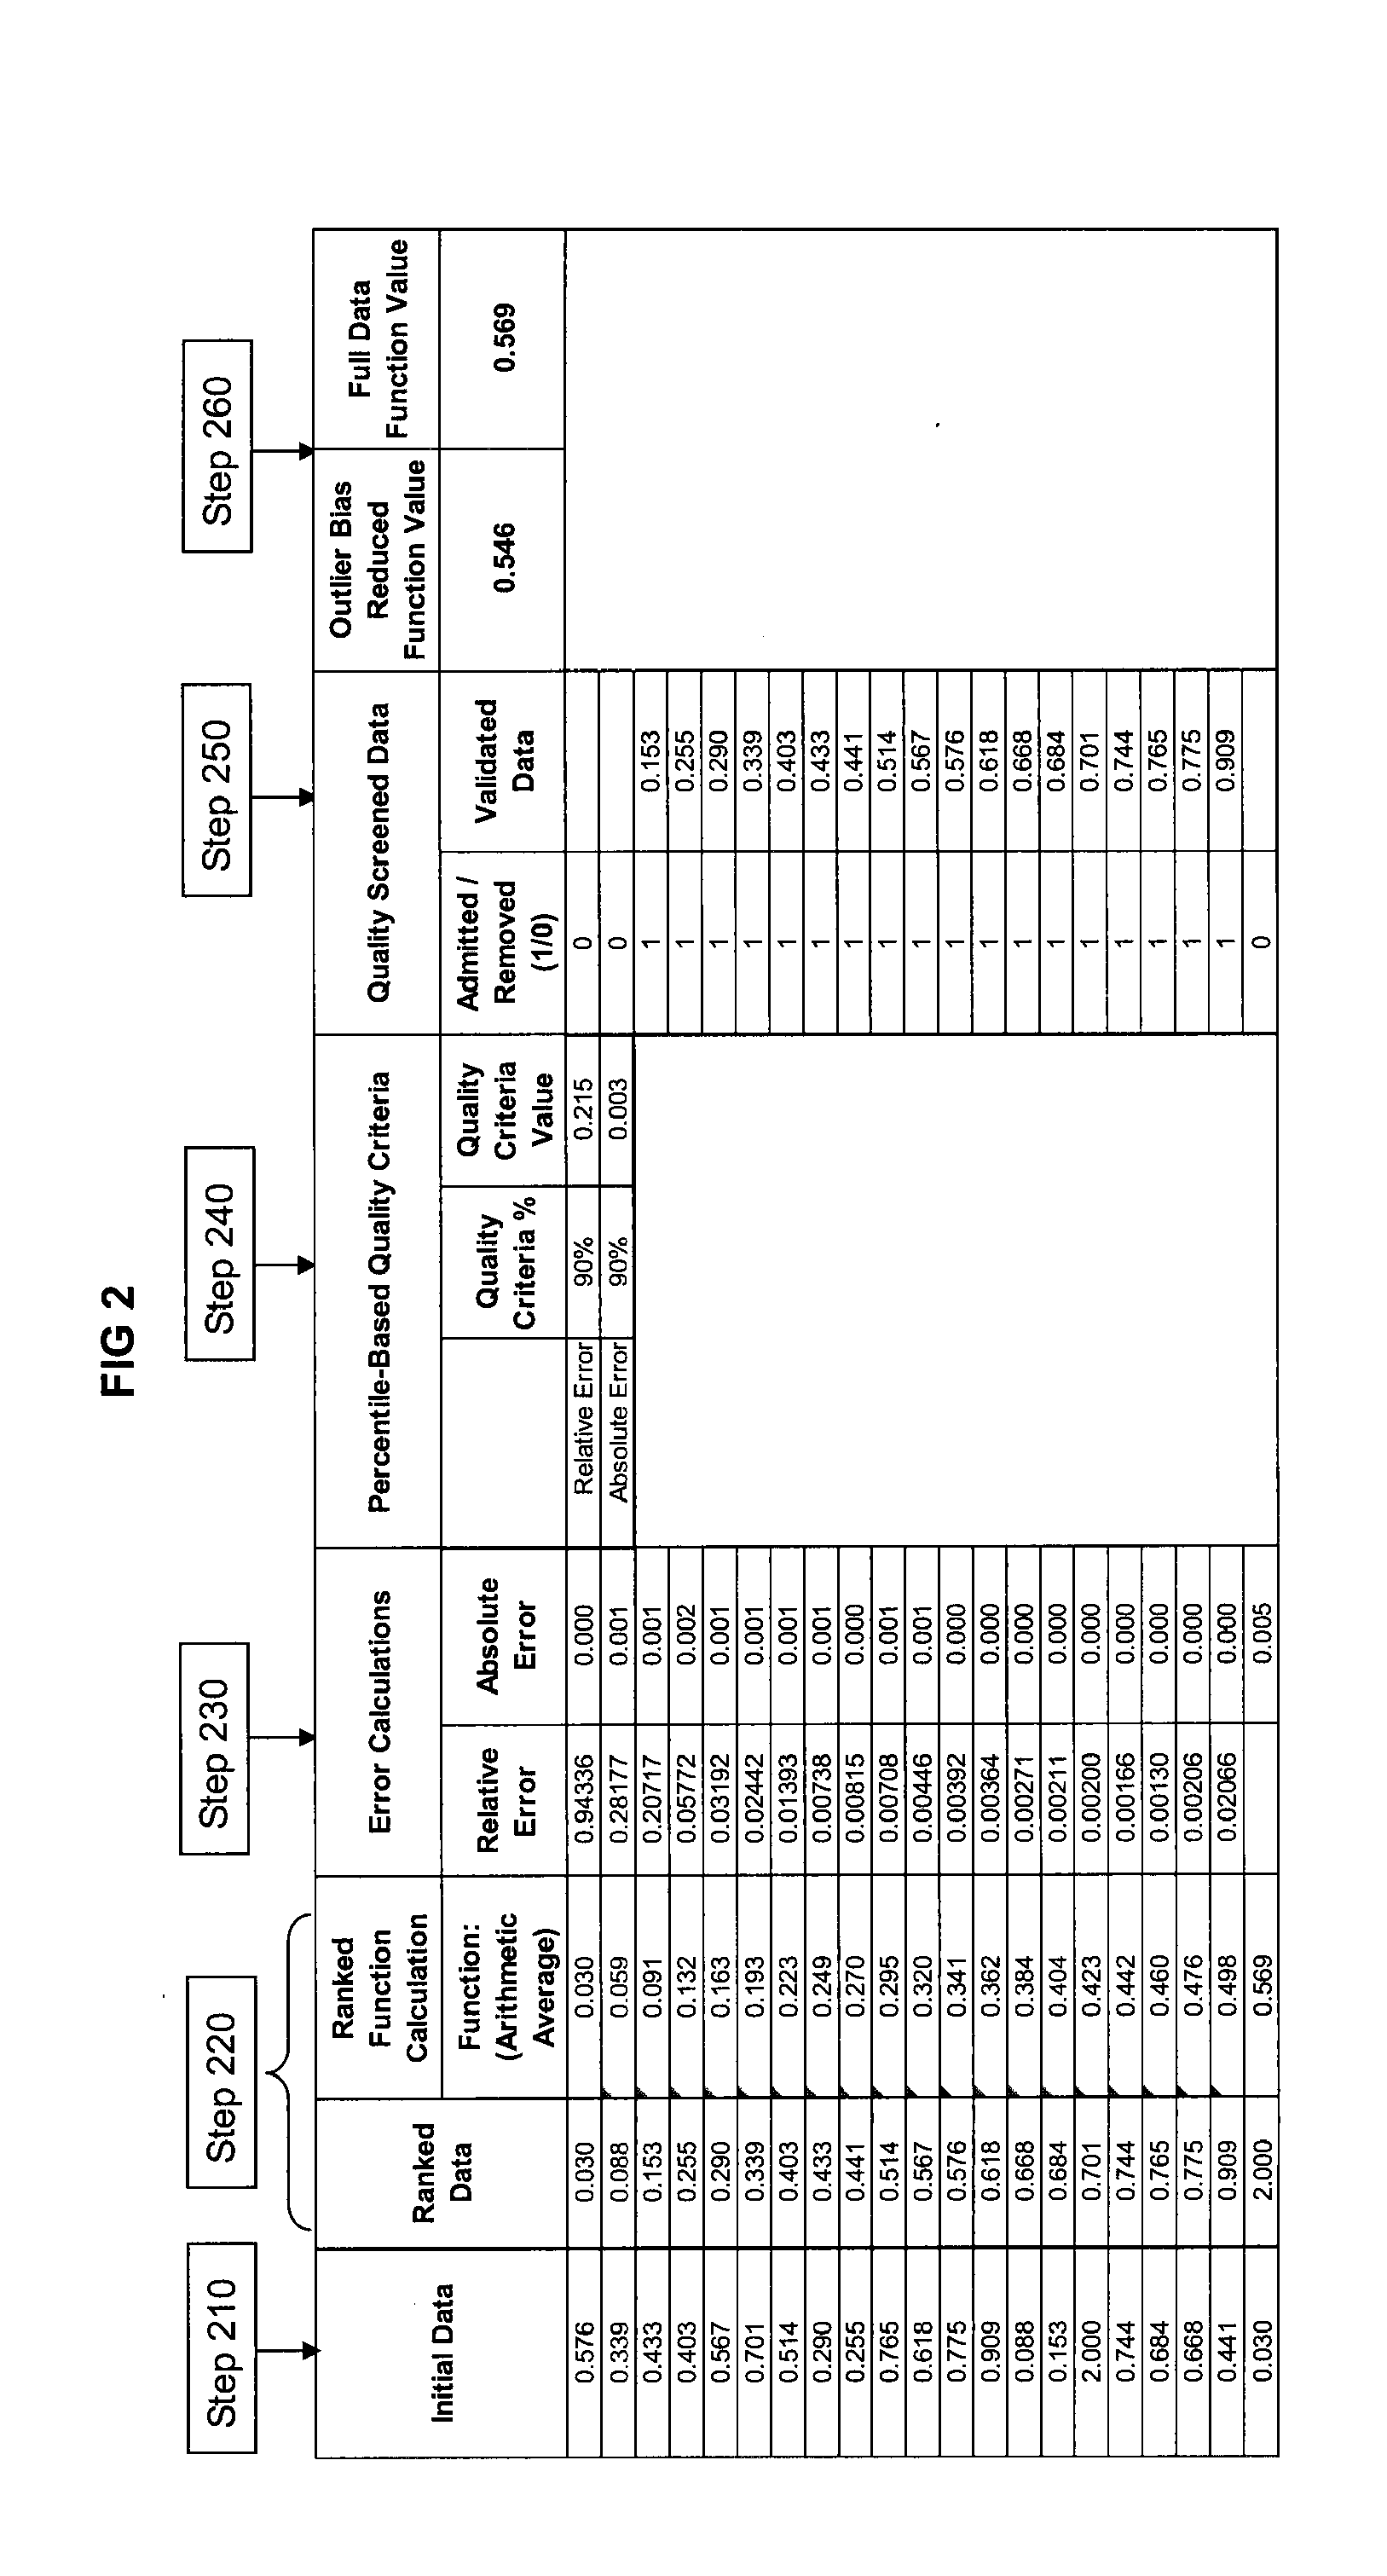 Dynamic outlier bias reduction system and method